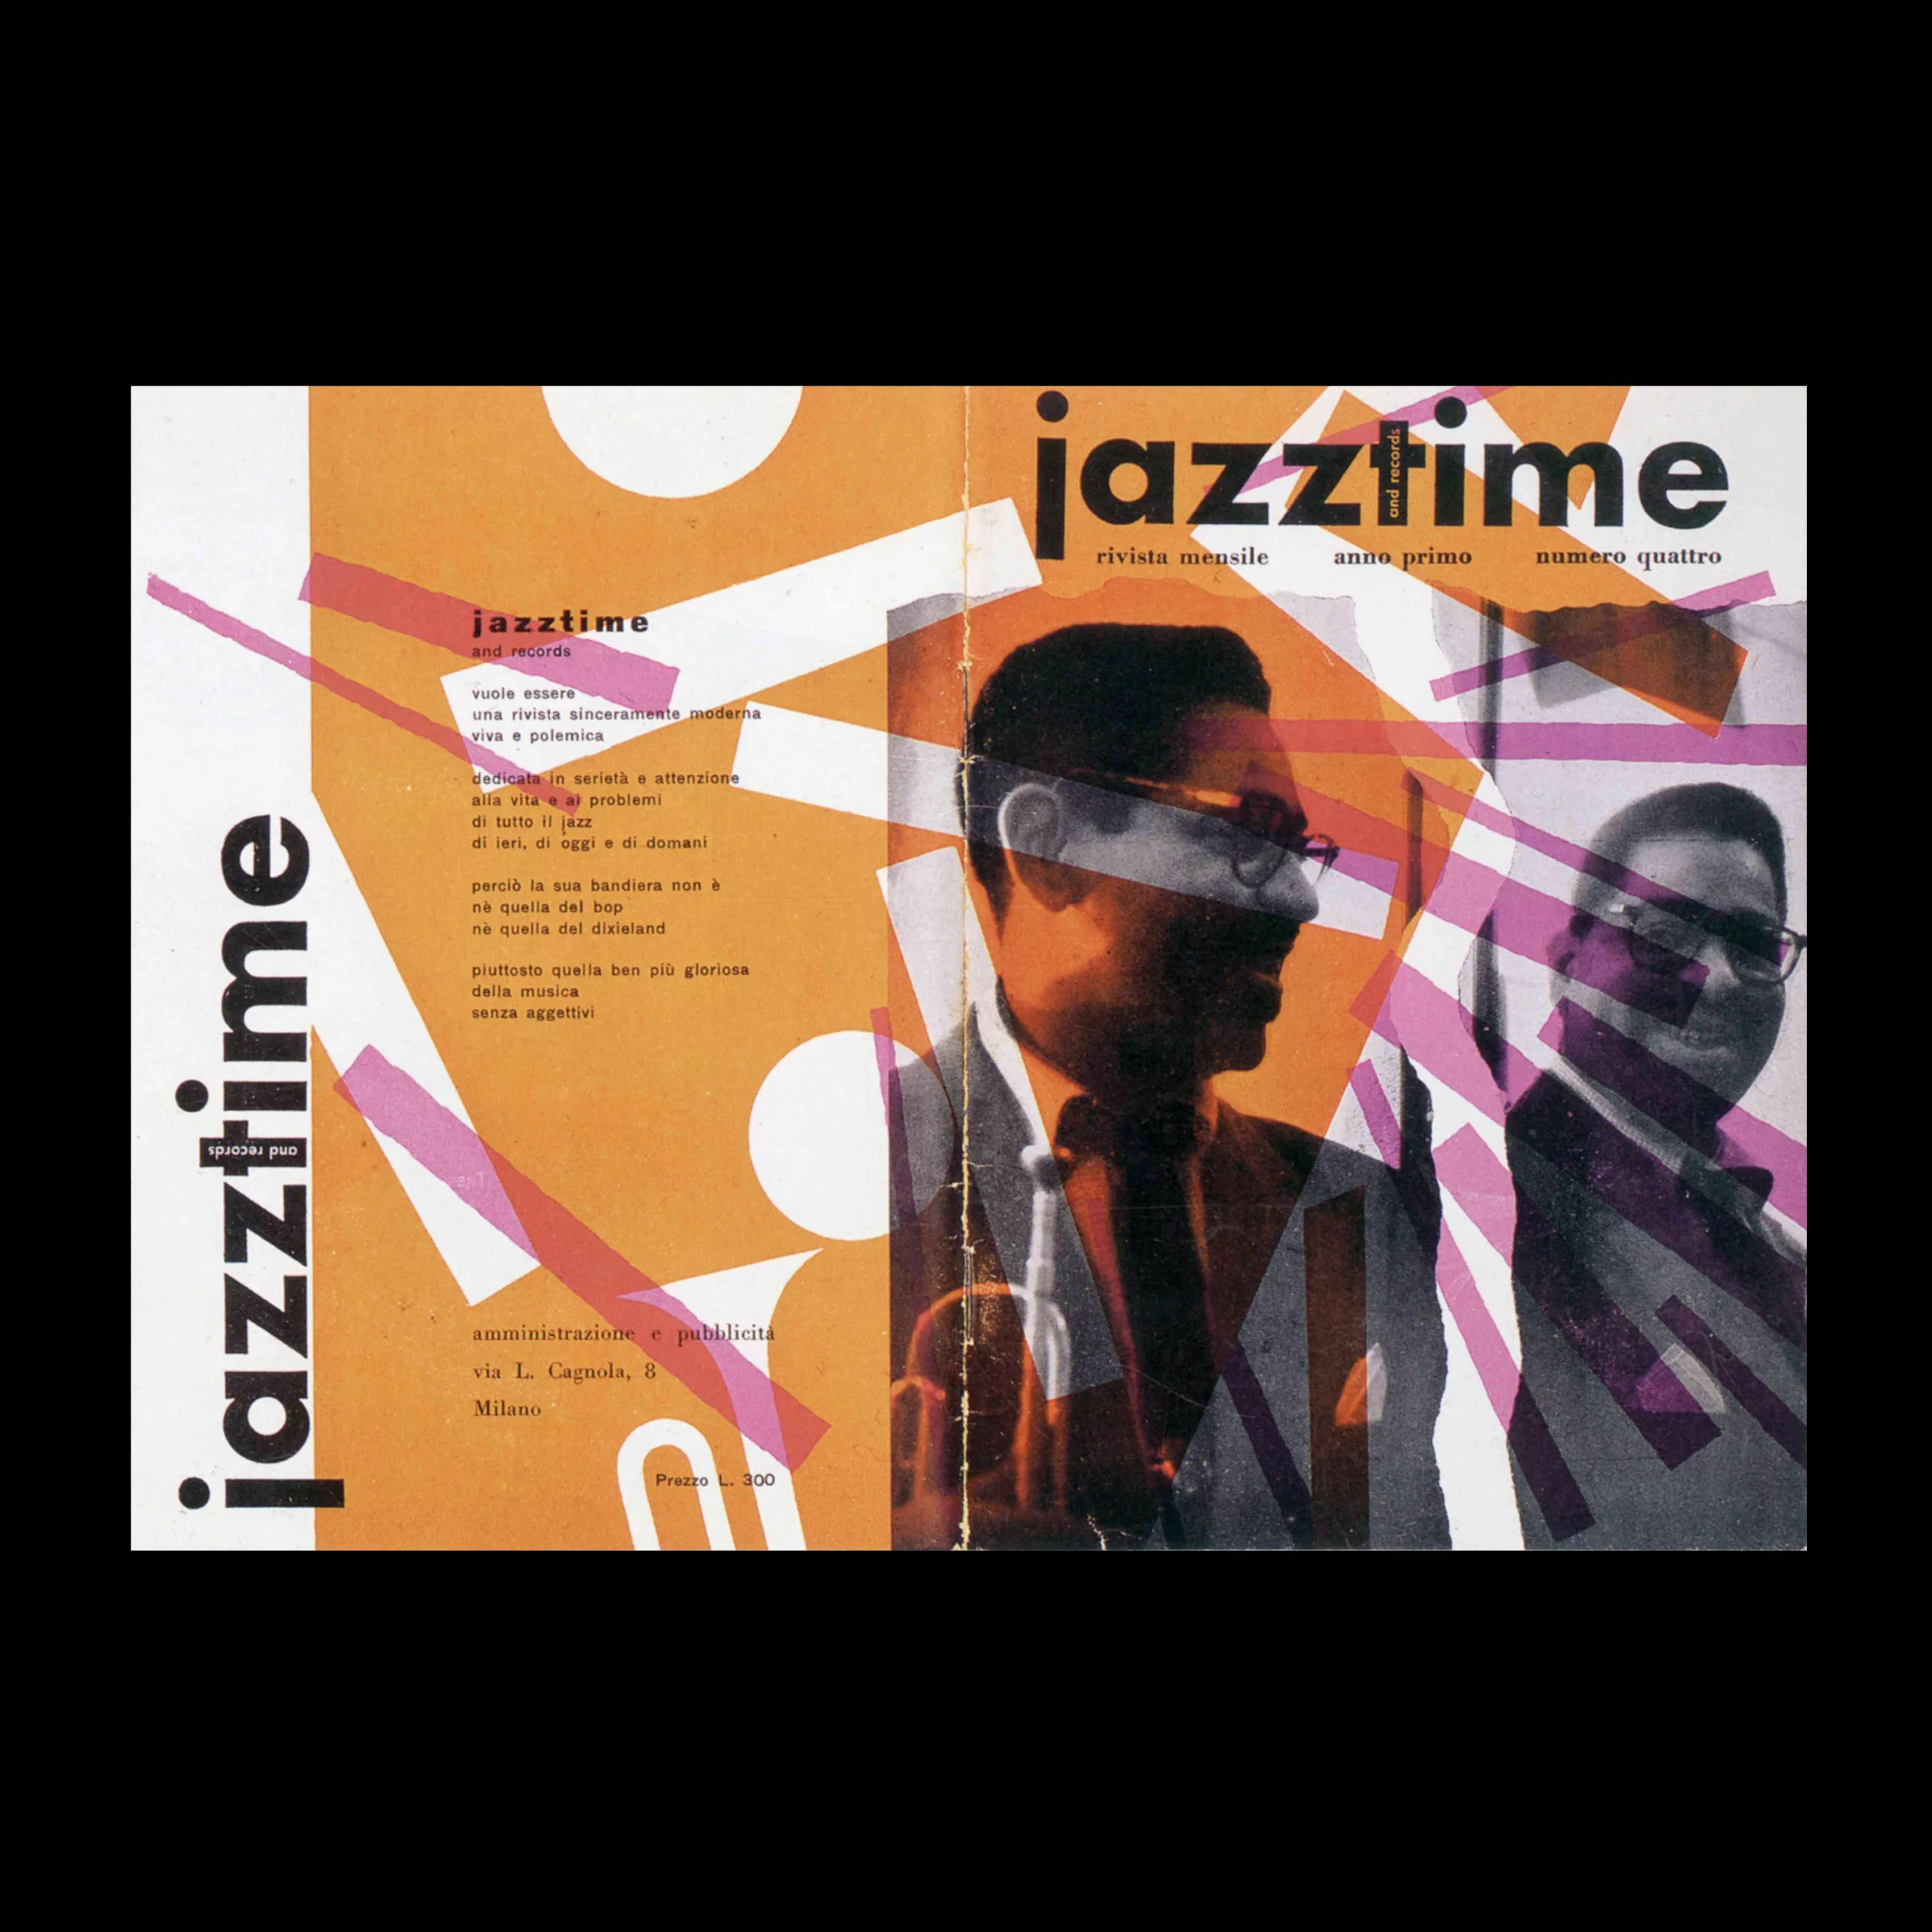 Jazztime magazines, 1952 designed from Max Huber scanned from Idea 335, 2009-7 – Max Huber Special